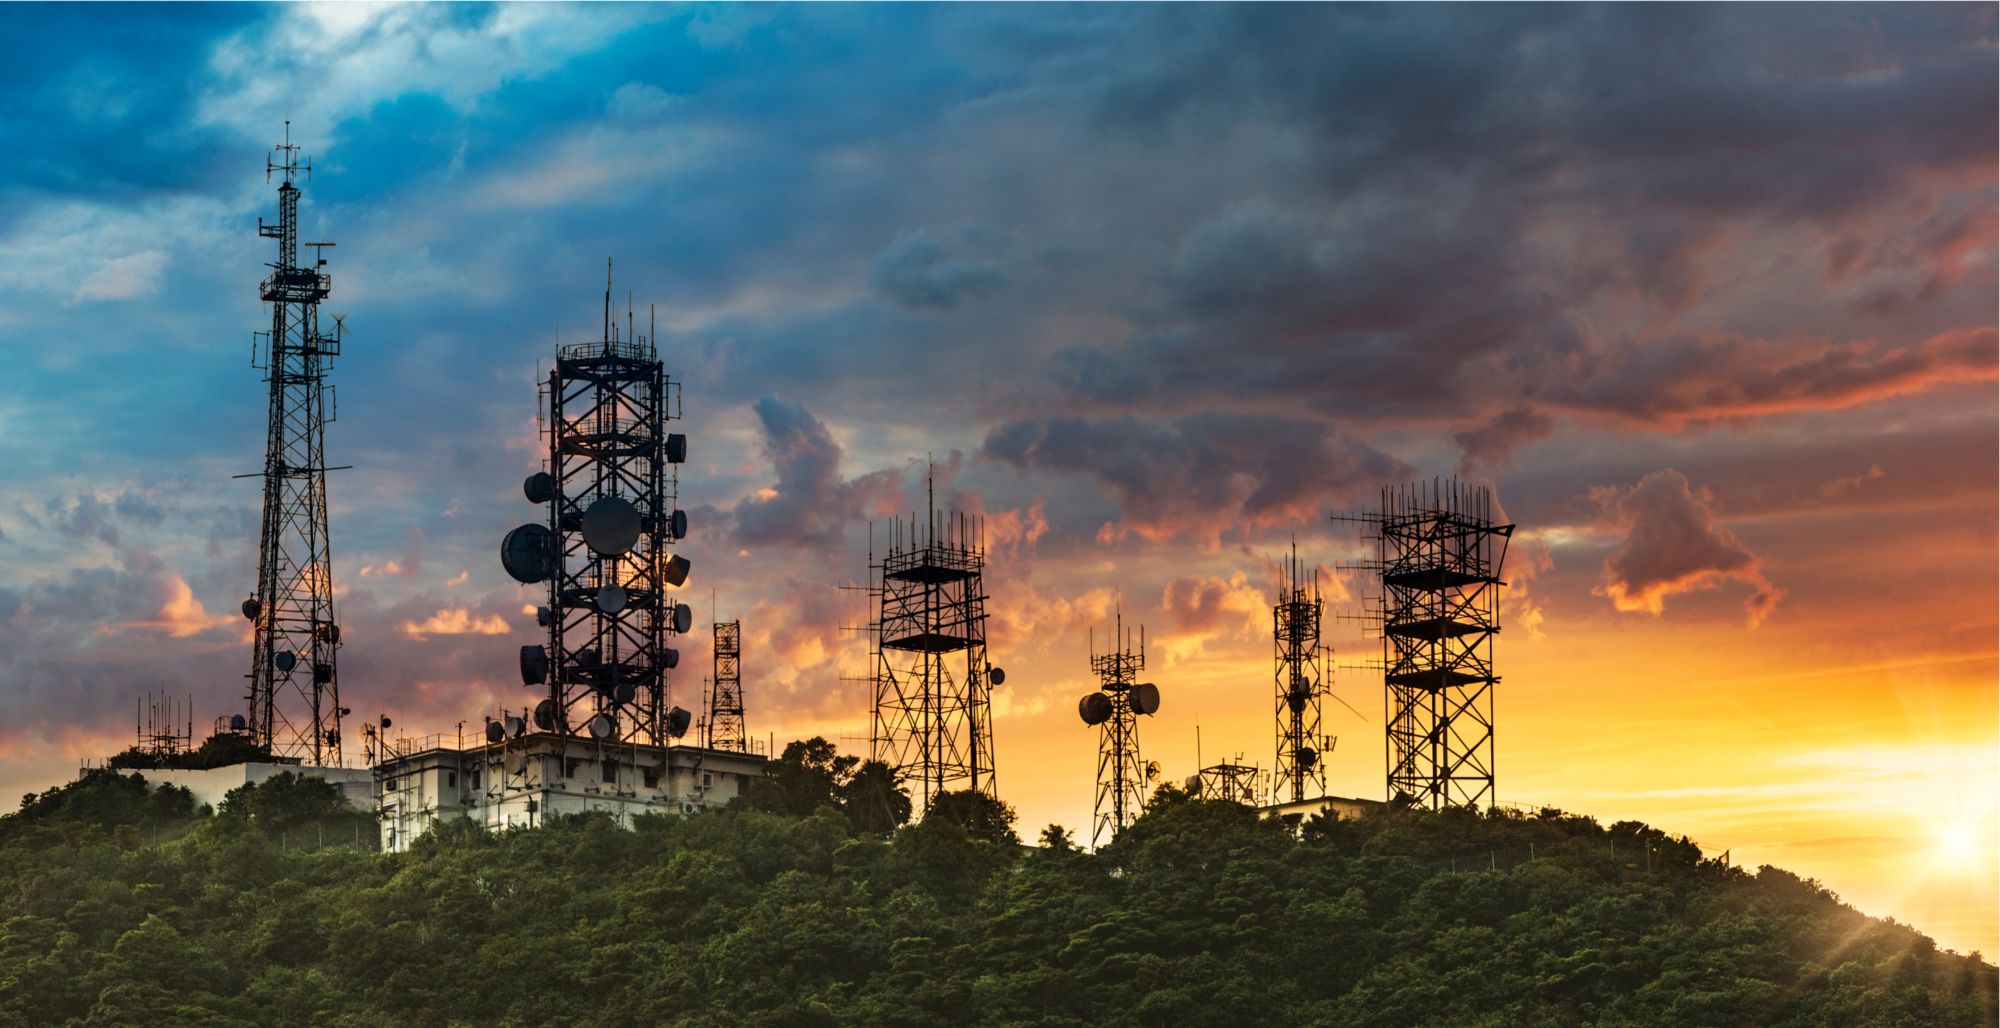 Cell towers standing on a hill.